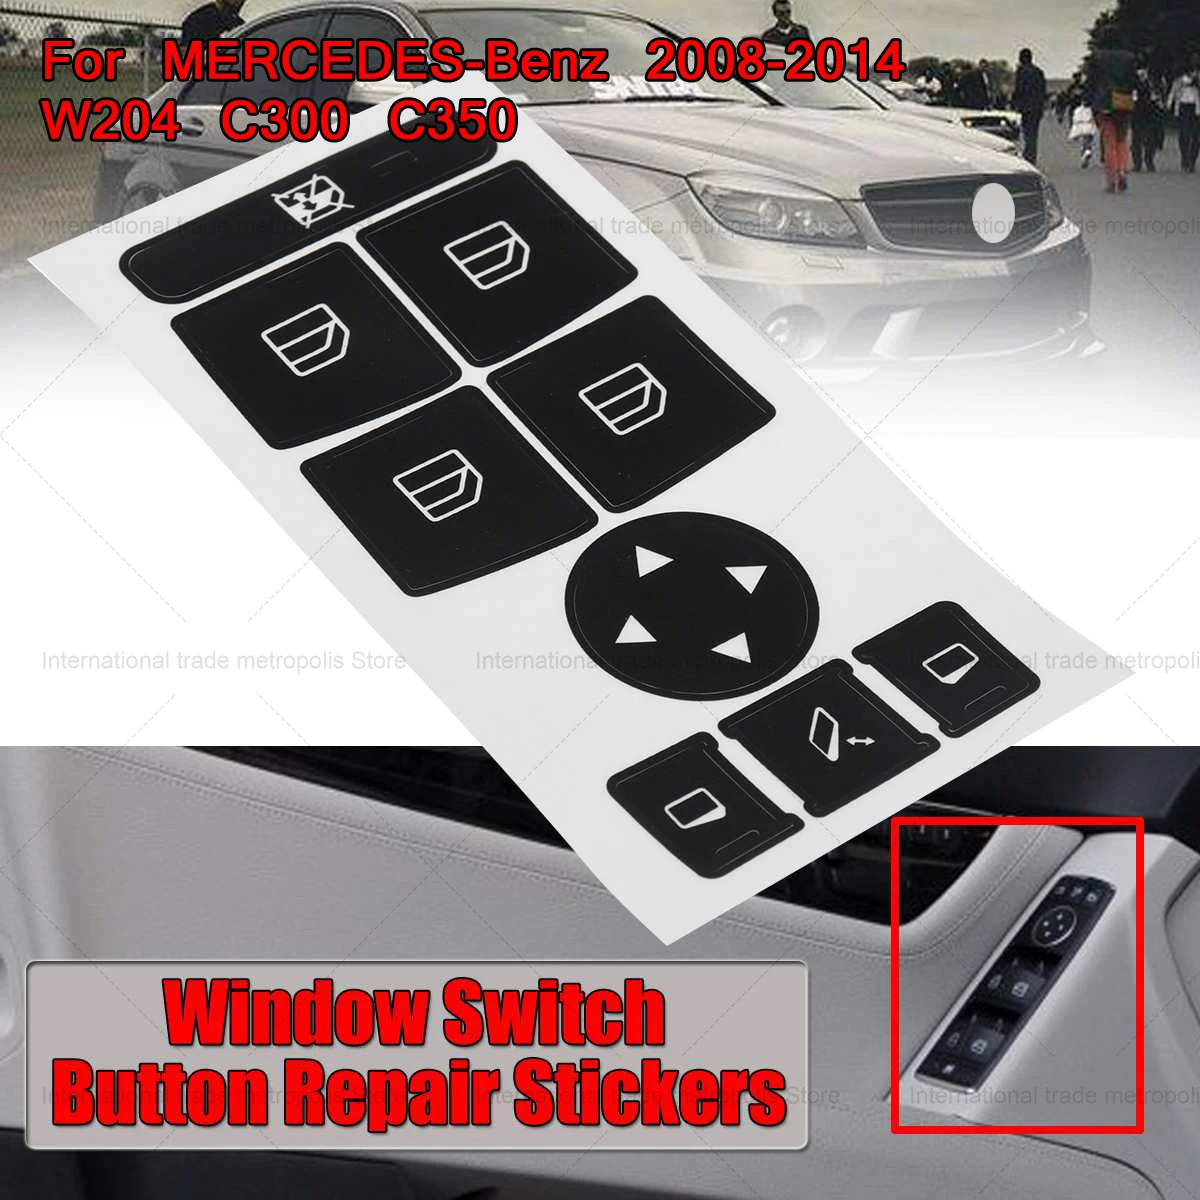 

1 Pcs Car Window Control Switch Button Repair Stickers Deacal For Mercedes For Benz 2007-2014 Button Repair Kit Fix Ugly Button